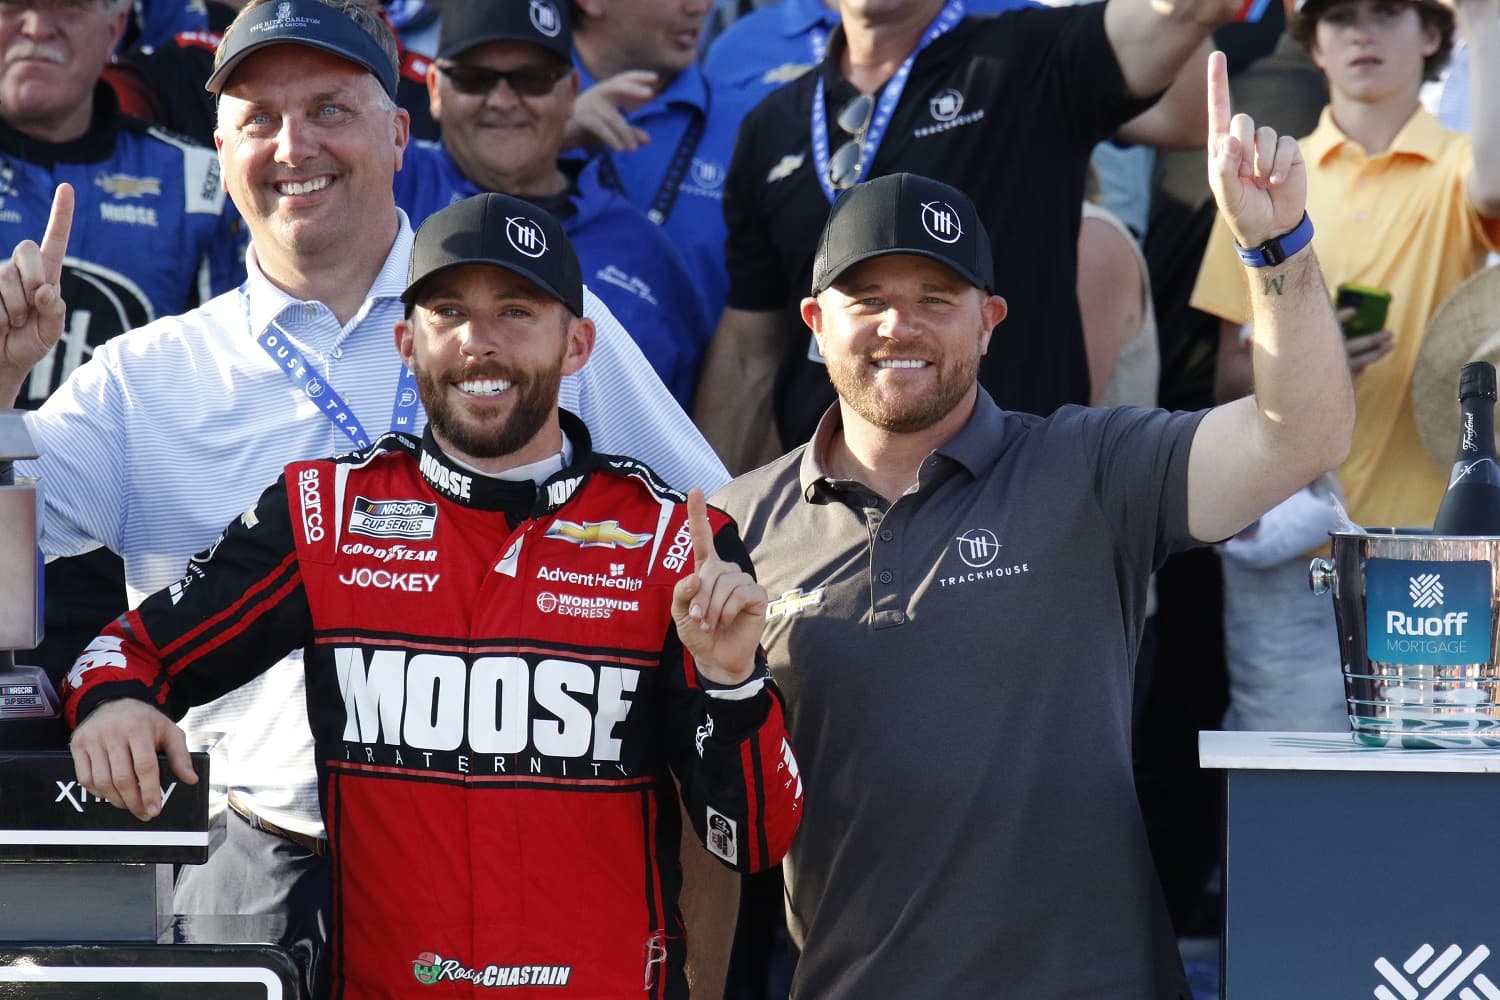 Justin Marks Admits He Let Ross Chastain Go Too Far